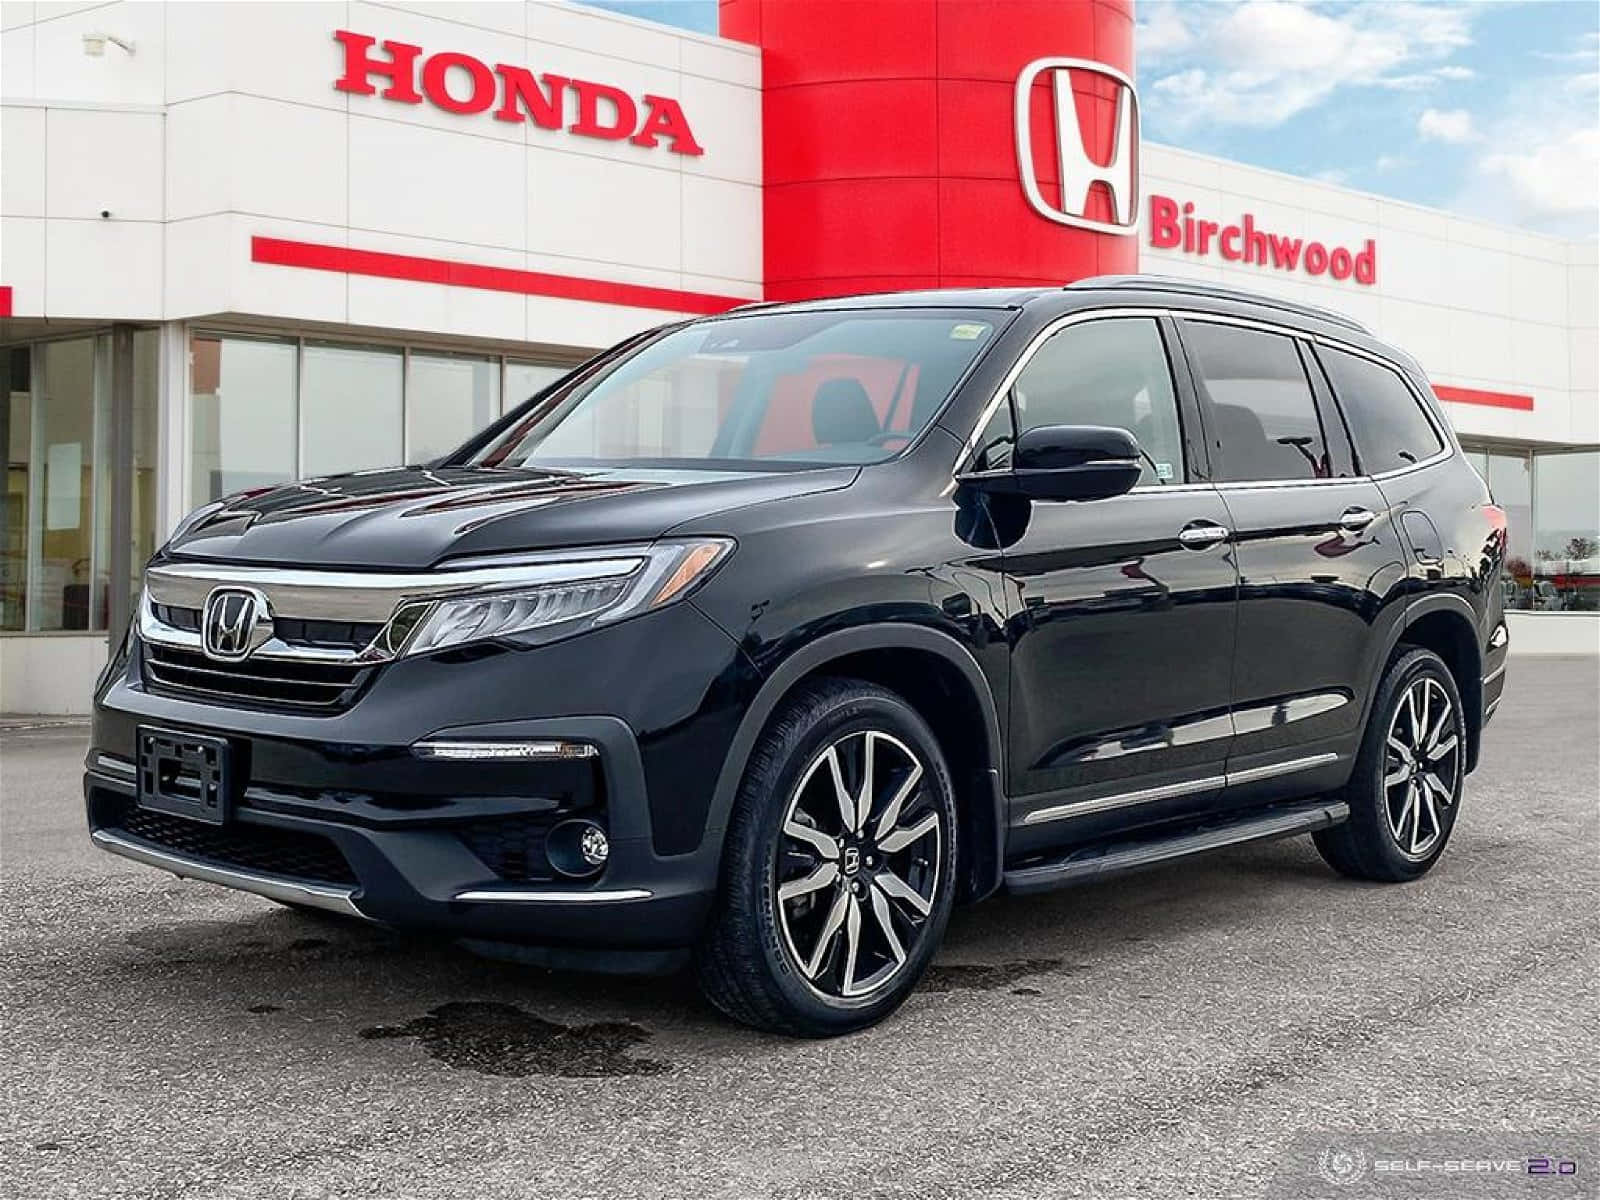 A Black Honda Pilot Is Parked In Front Of A Honda Dealership